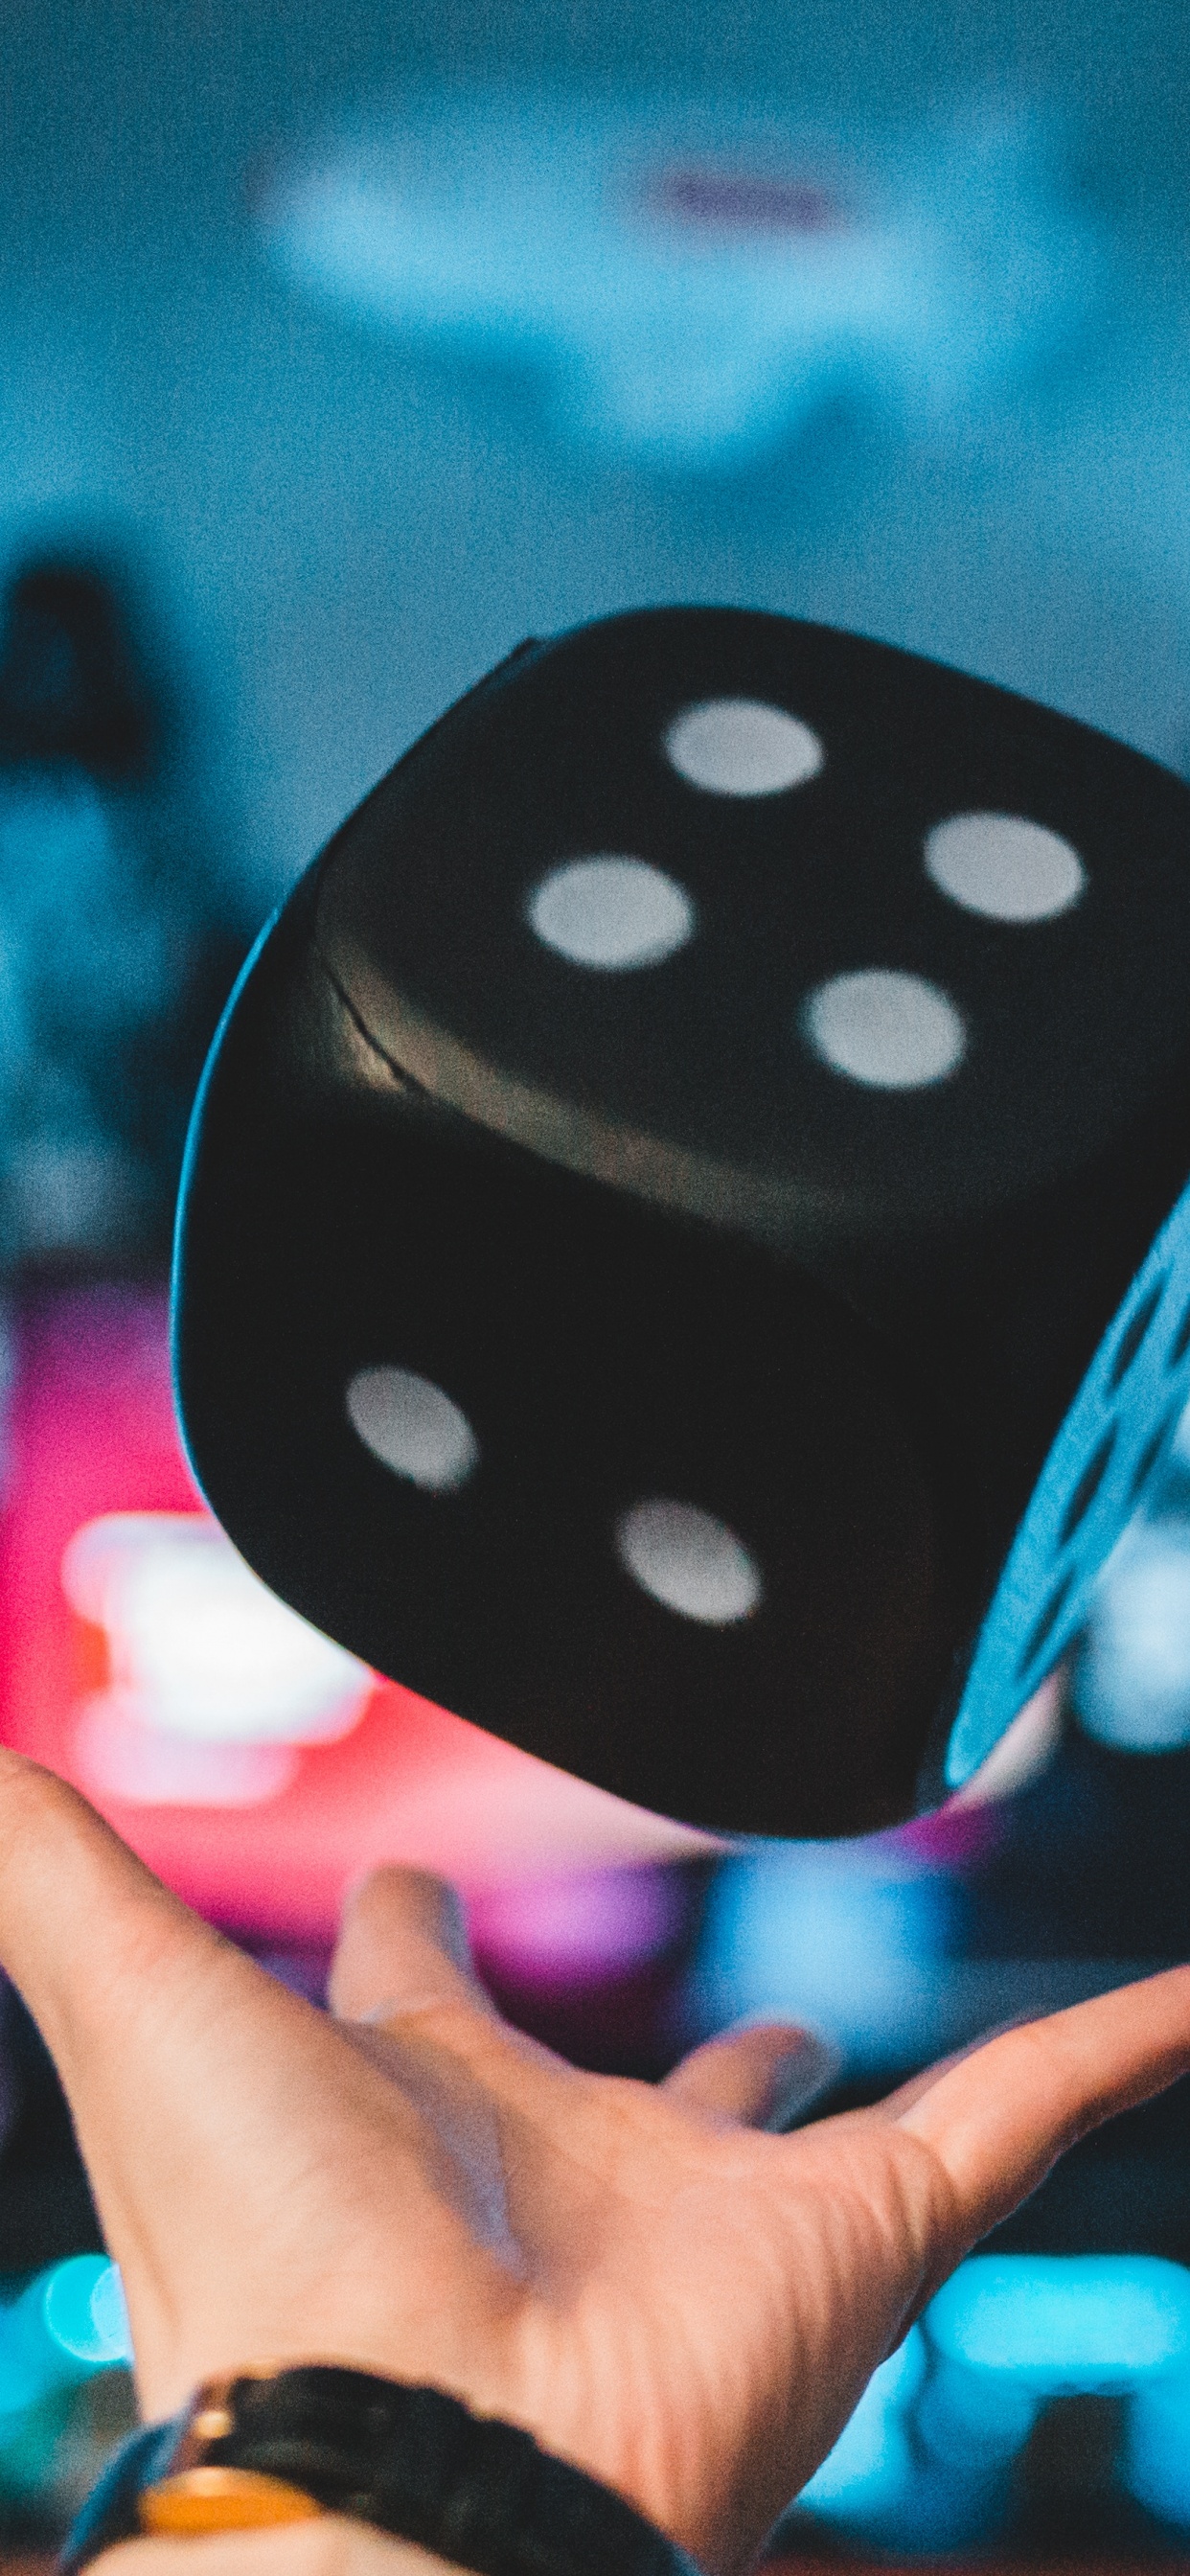 Person Holding Purple and White Polka Dot Dice. Wallpaper in 1242x2688 Resolution